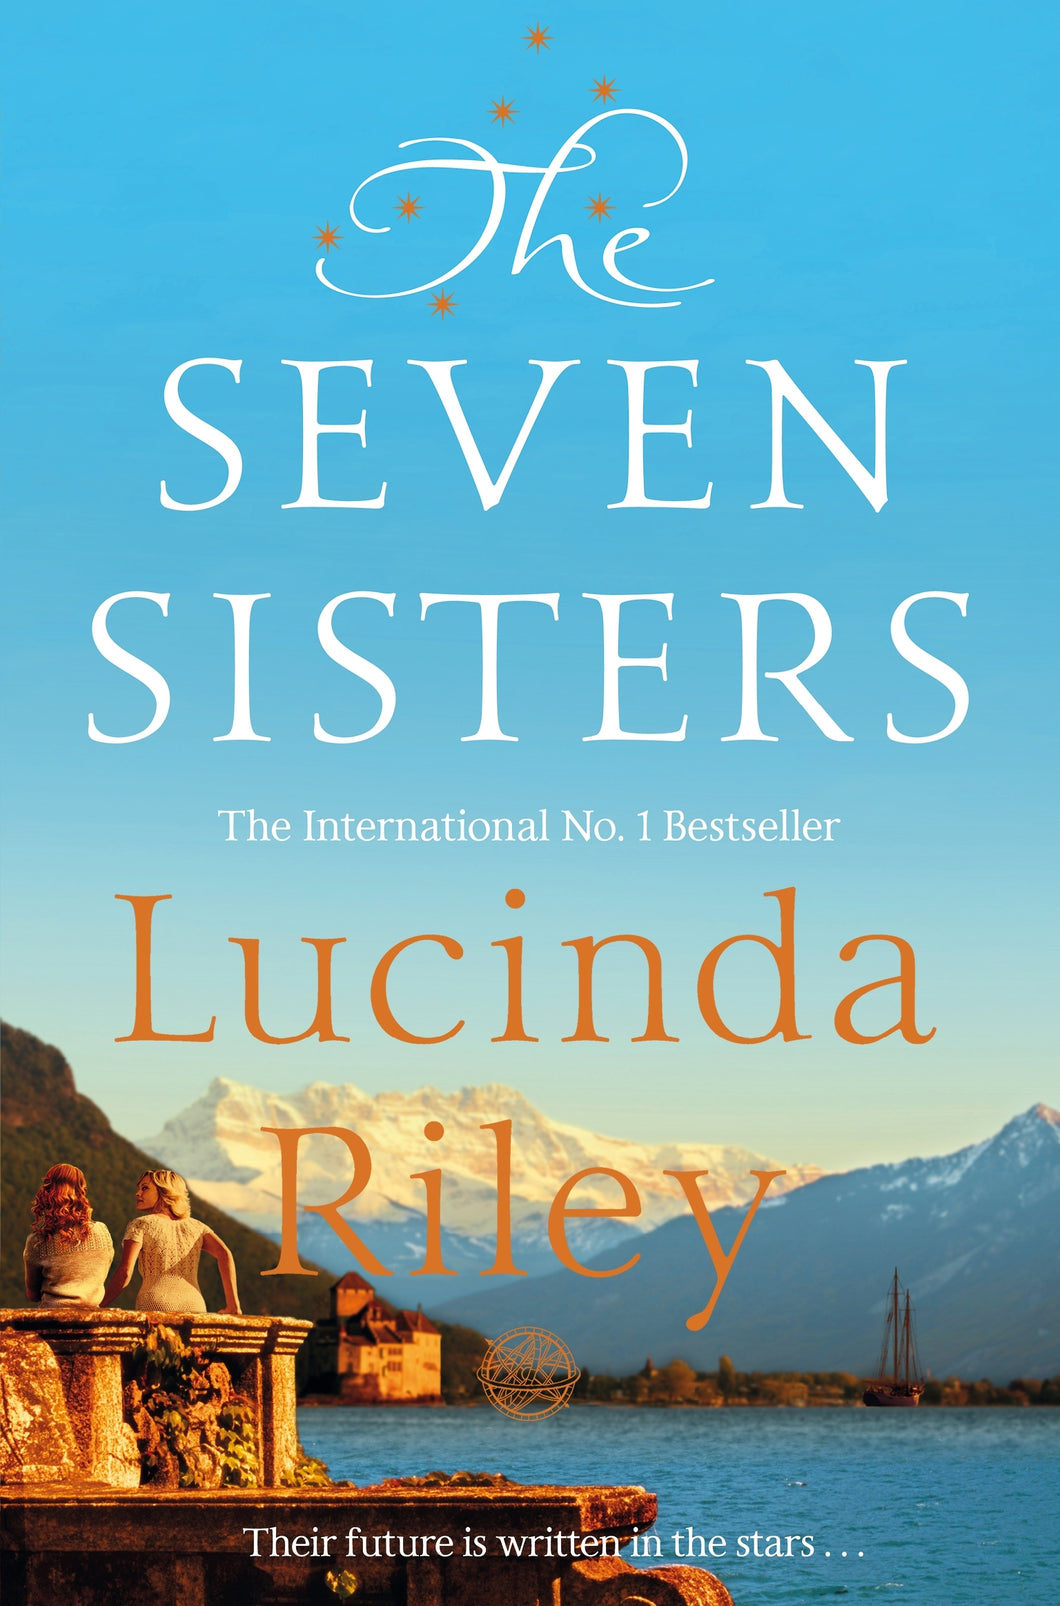 The Seven Sisters by Lucinda Riley (Book 1)